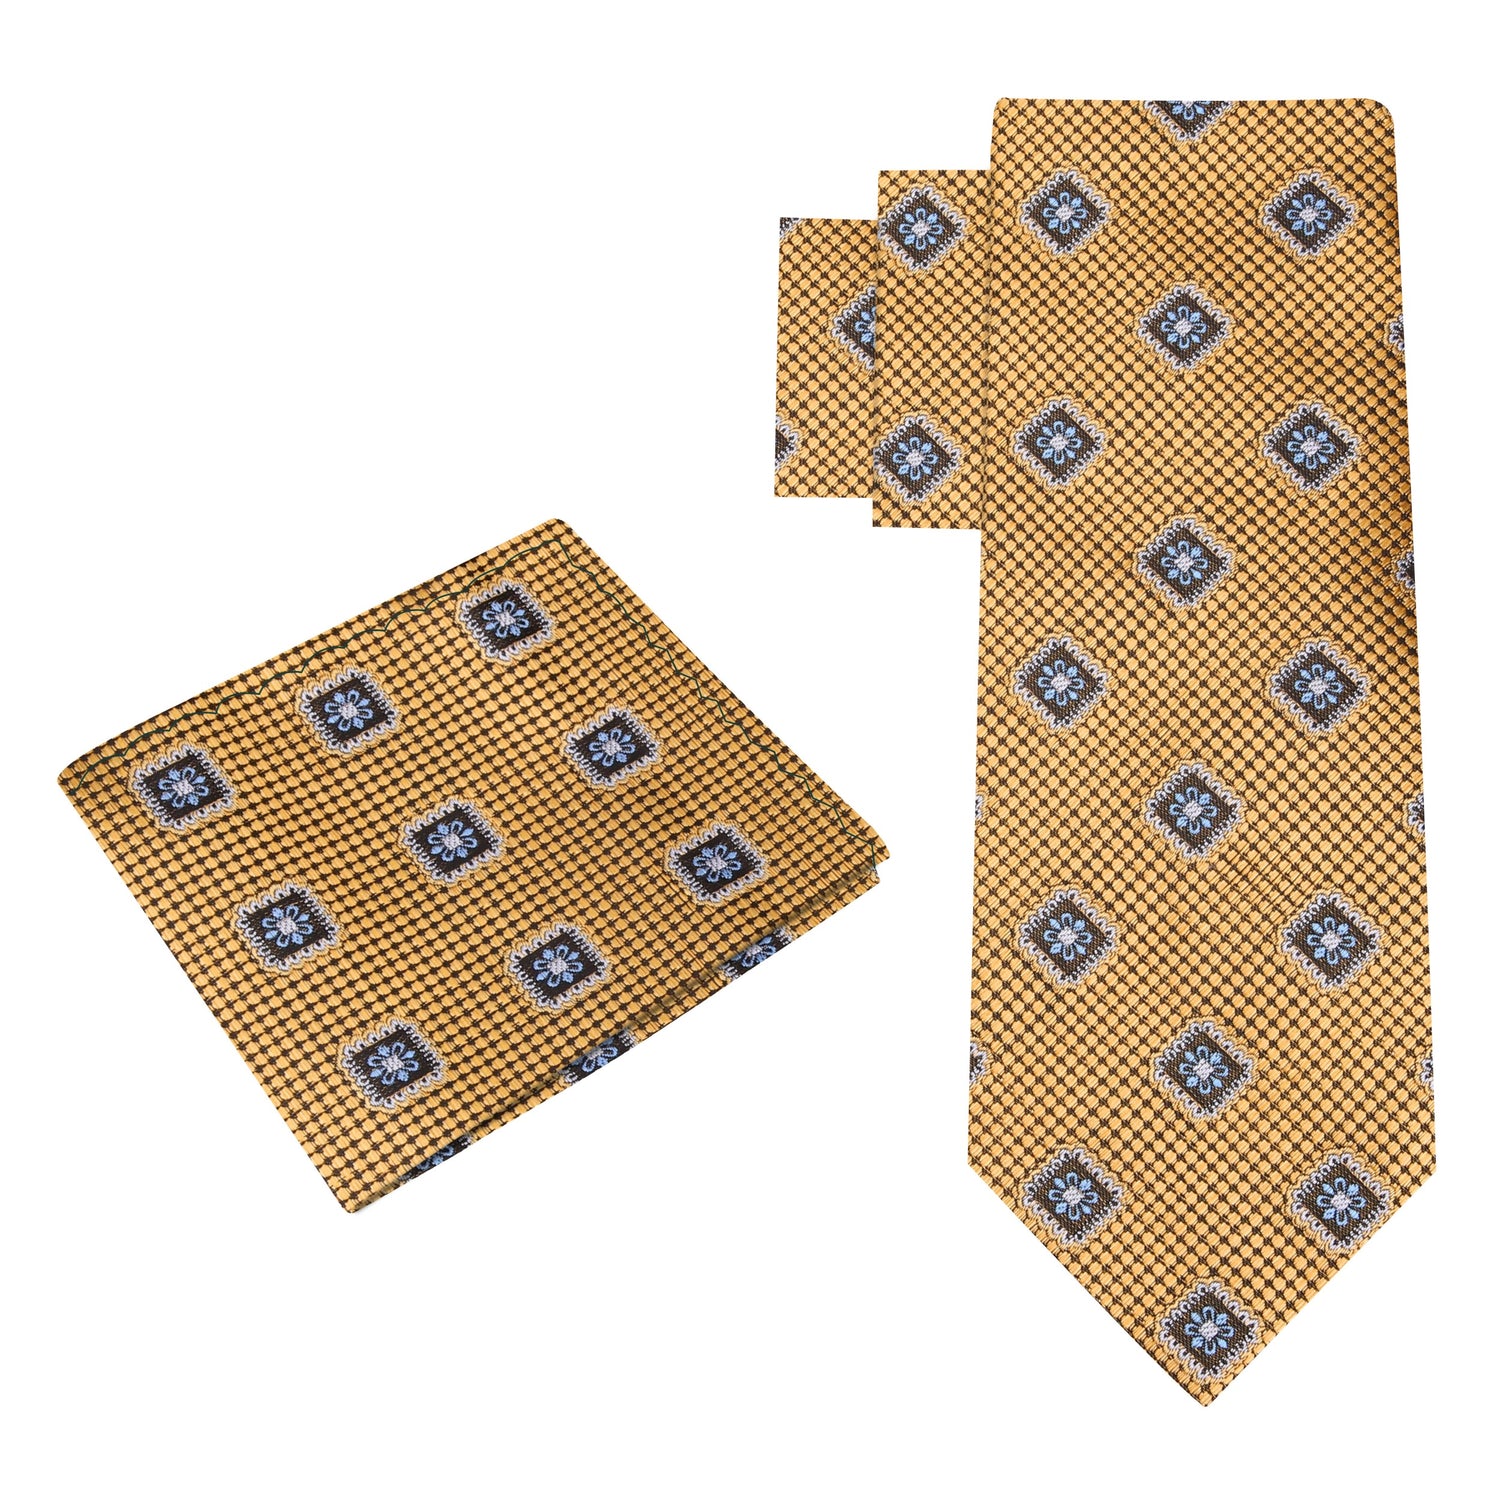 Alt View: Gold Geometric Medallion Tie and Pocket Square